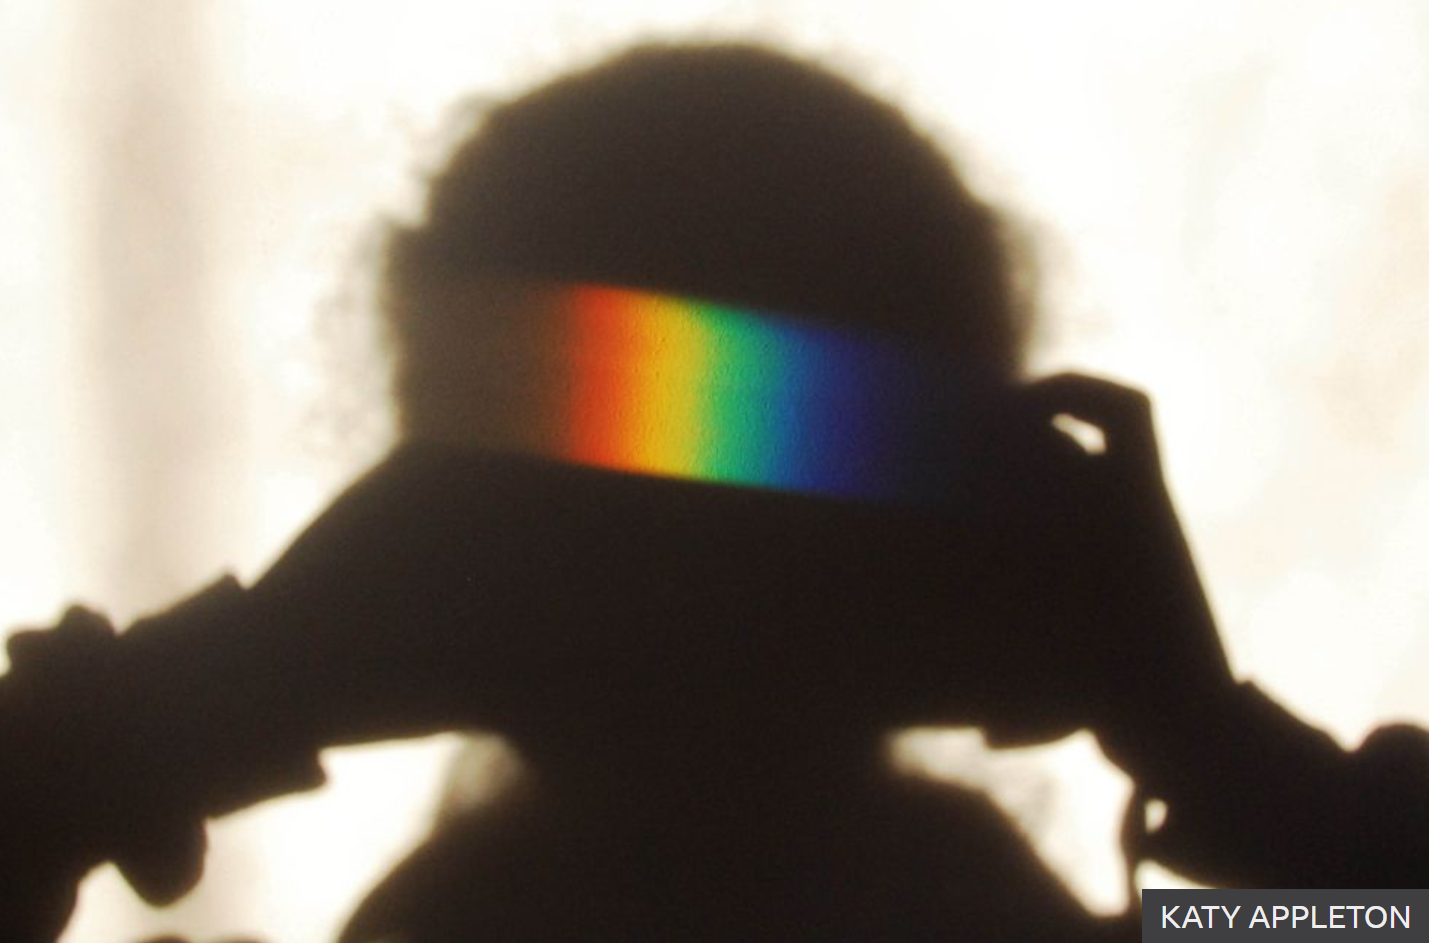 Image-shows-sunlight-casting-a-spectrum-on-the-wall-having-passed-through-a-prism-won-the-Young-Science-Photographer-of-the-Year-General-Science-categoryRainbow-Shadow-Selfie-by-Katy-Appleton